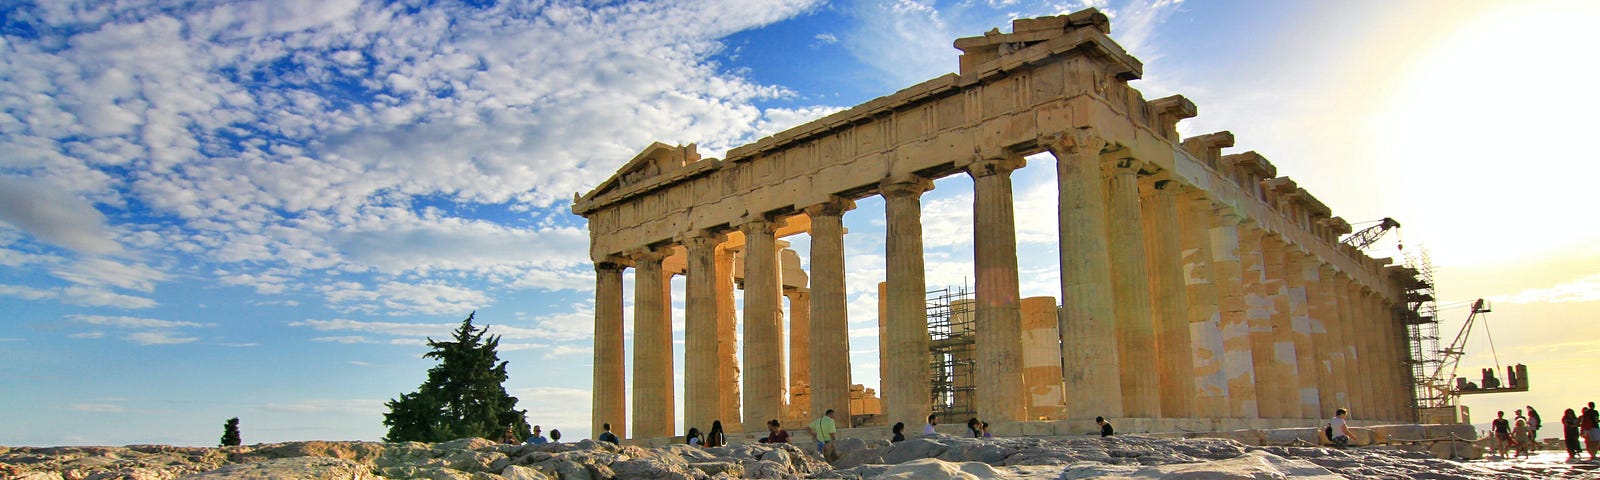 Photo of the Parthenon ruins on a mostly sunny day